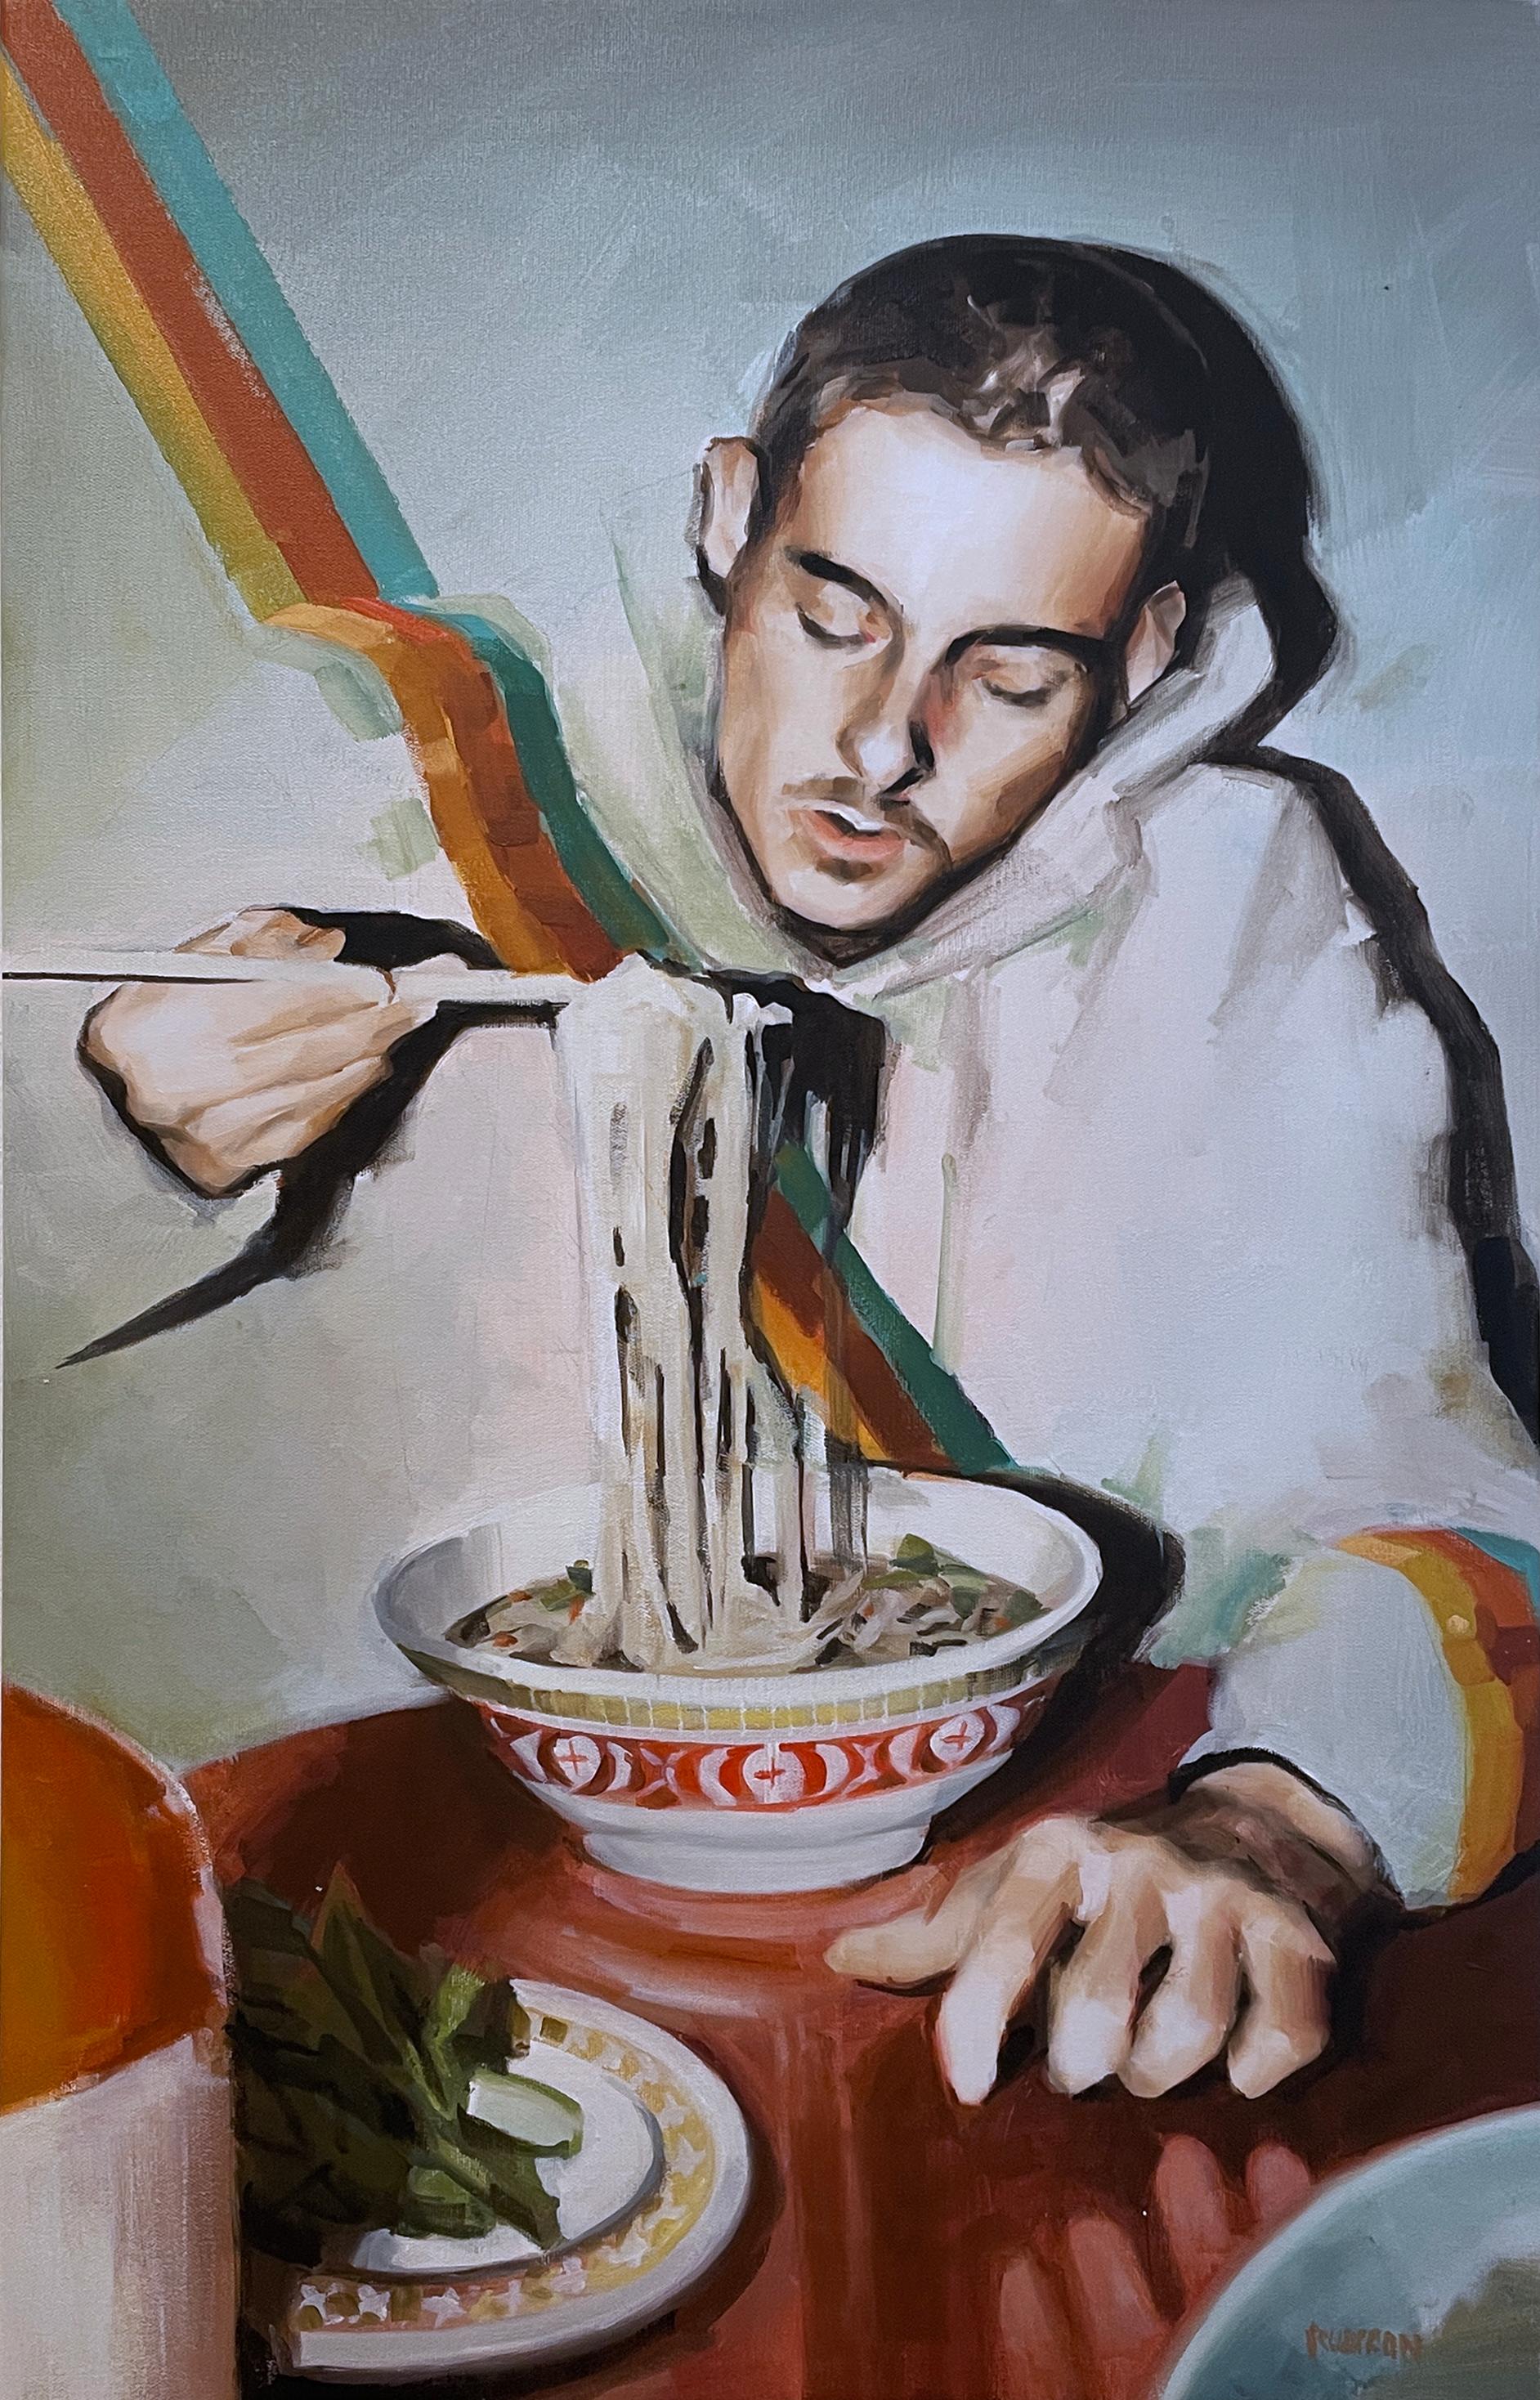 Open Late (2022) oil on canvas, figurative, man dining on bowl of noodles, ramen